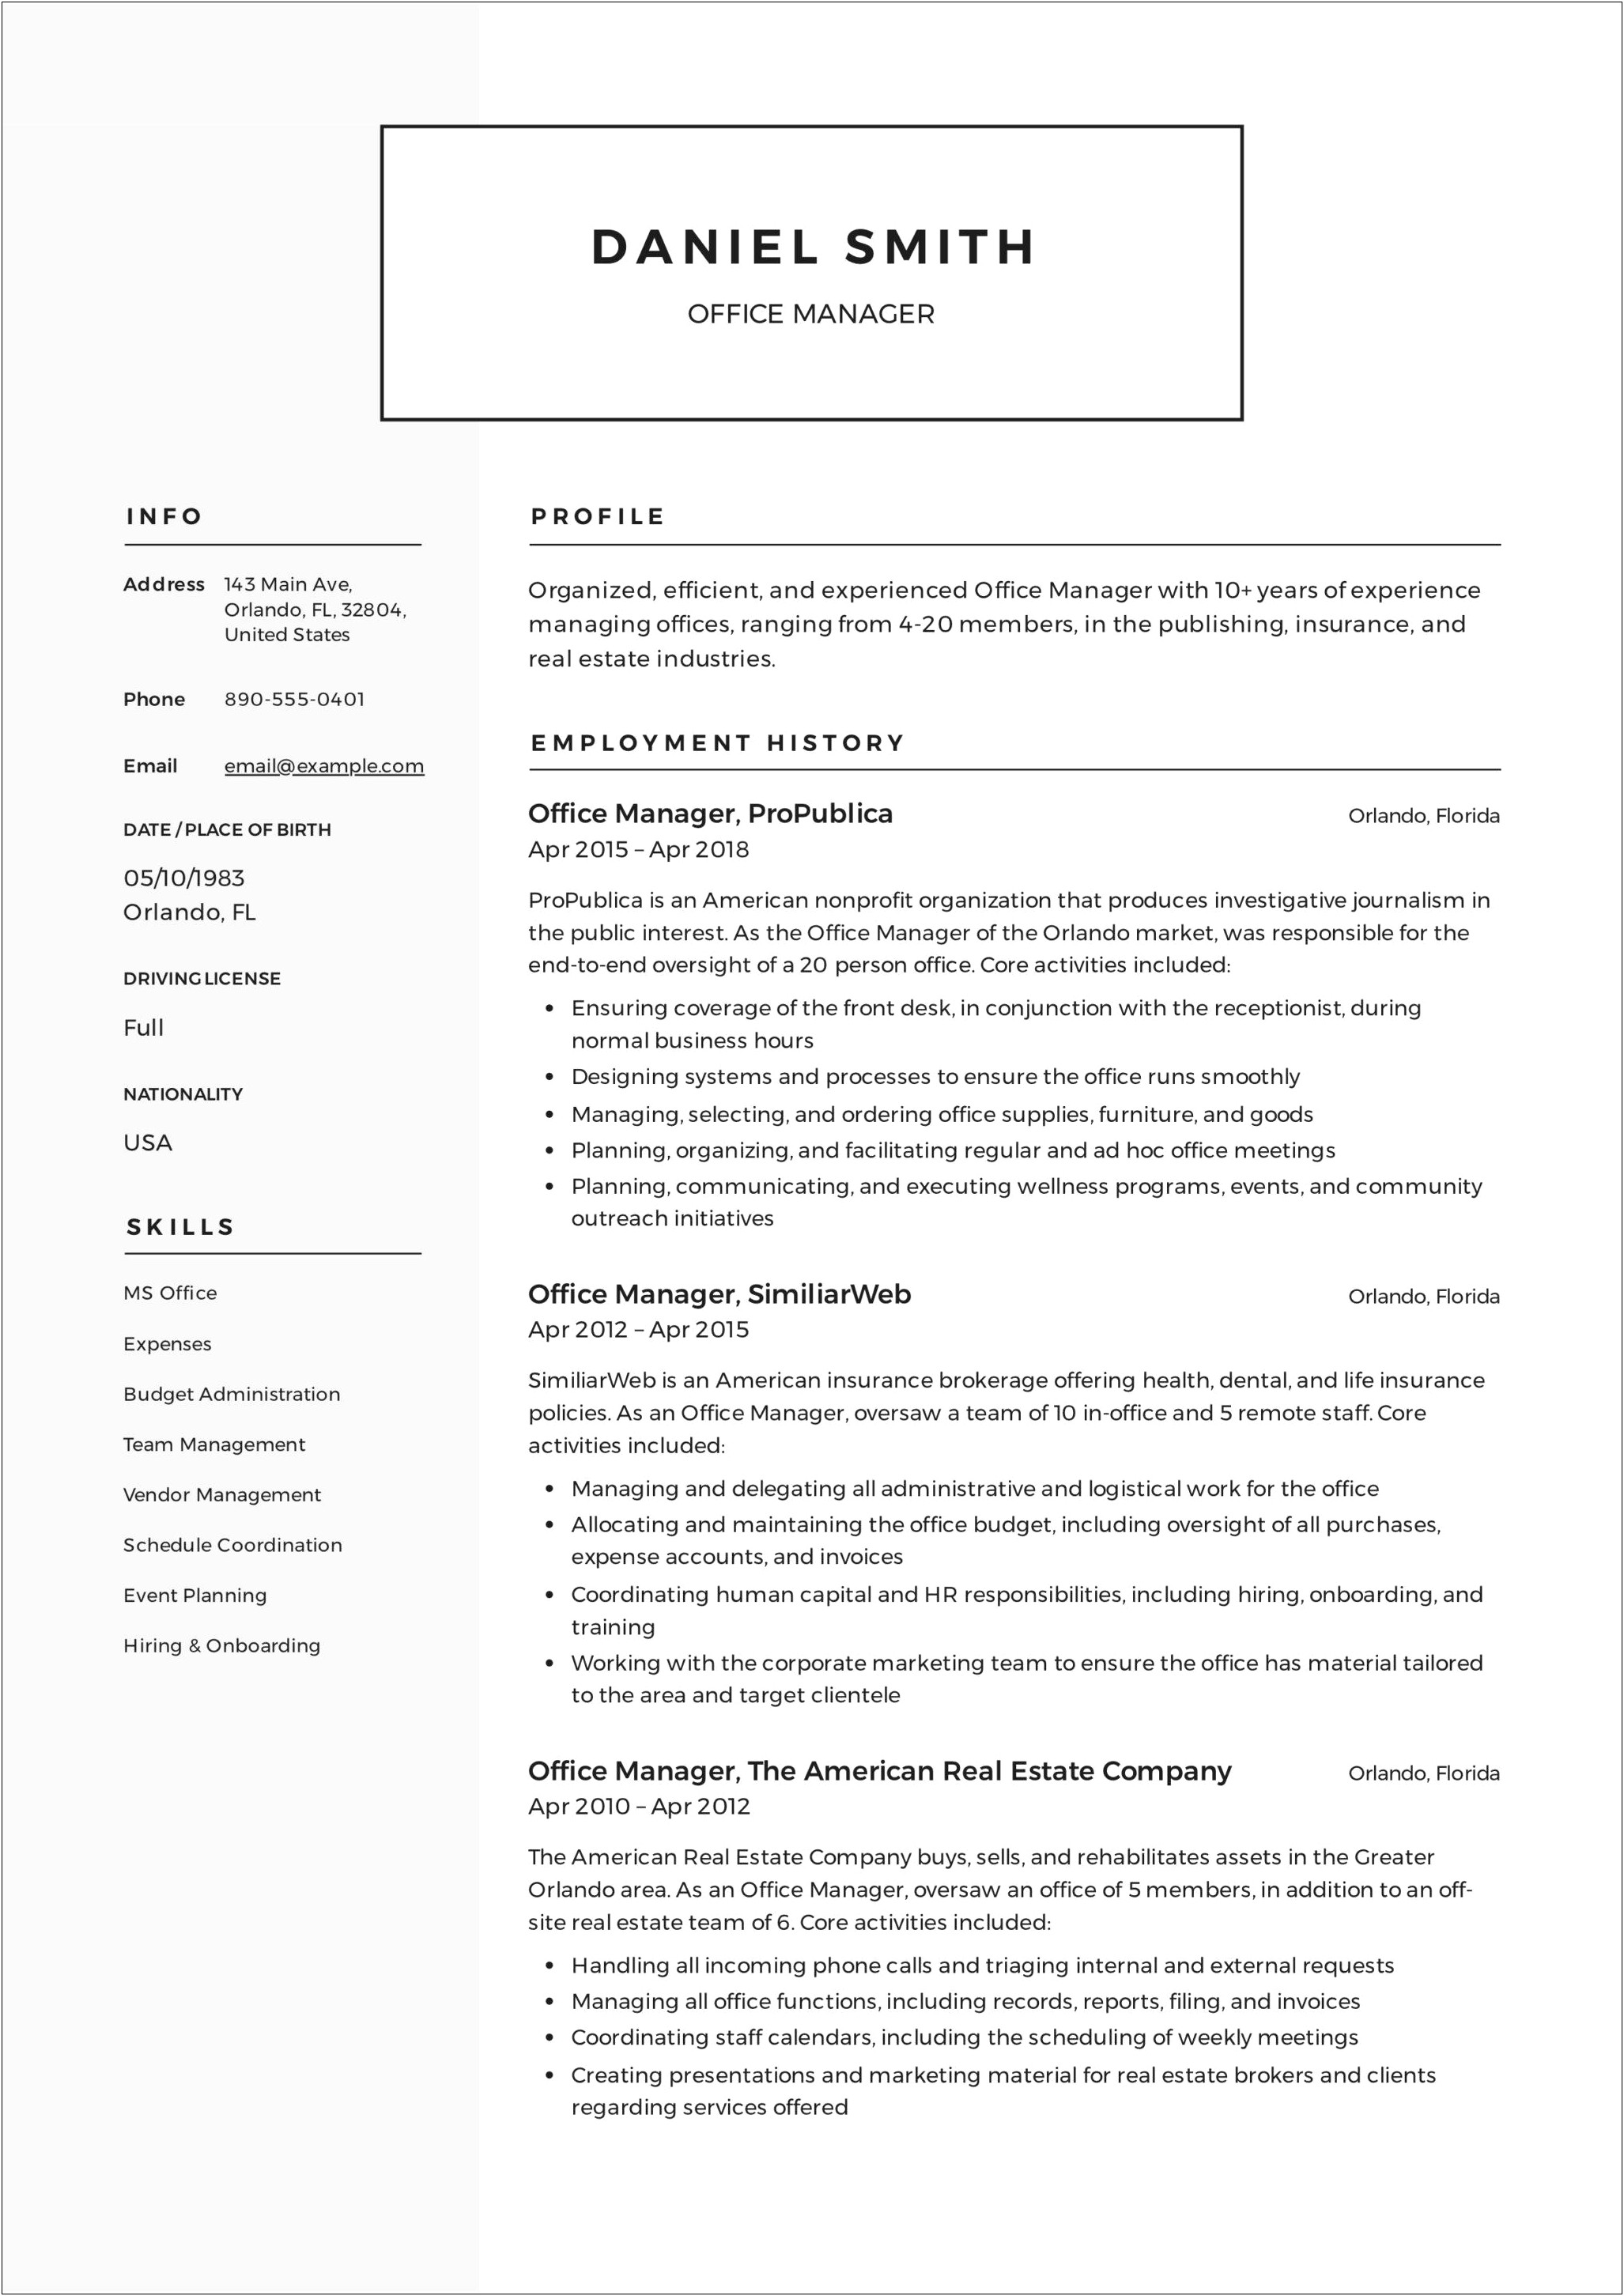 Office Manager On A Resume